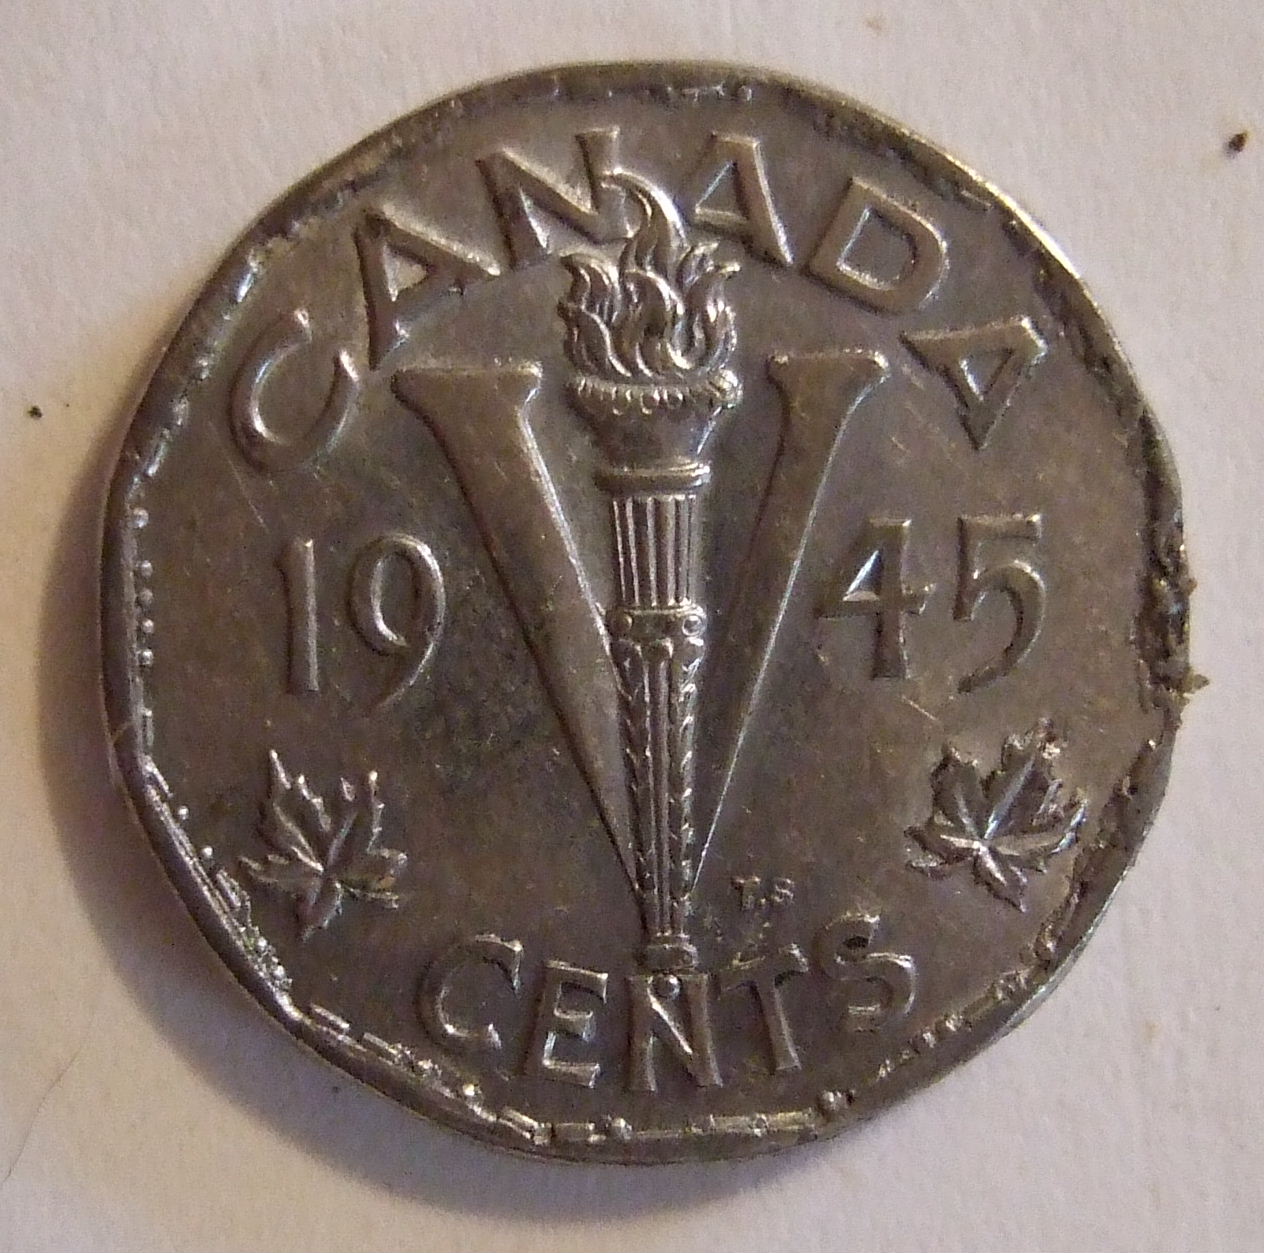 1945 Canada 5 cents coin 